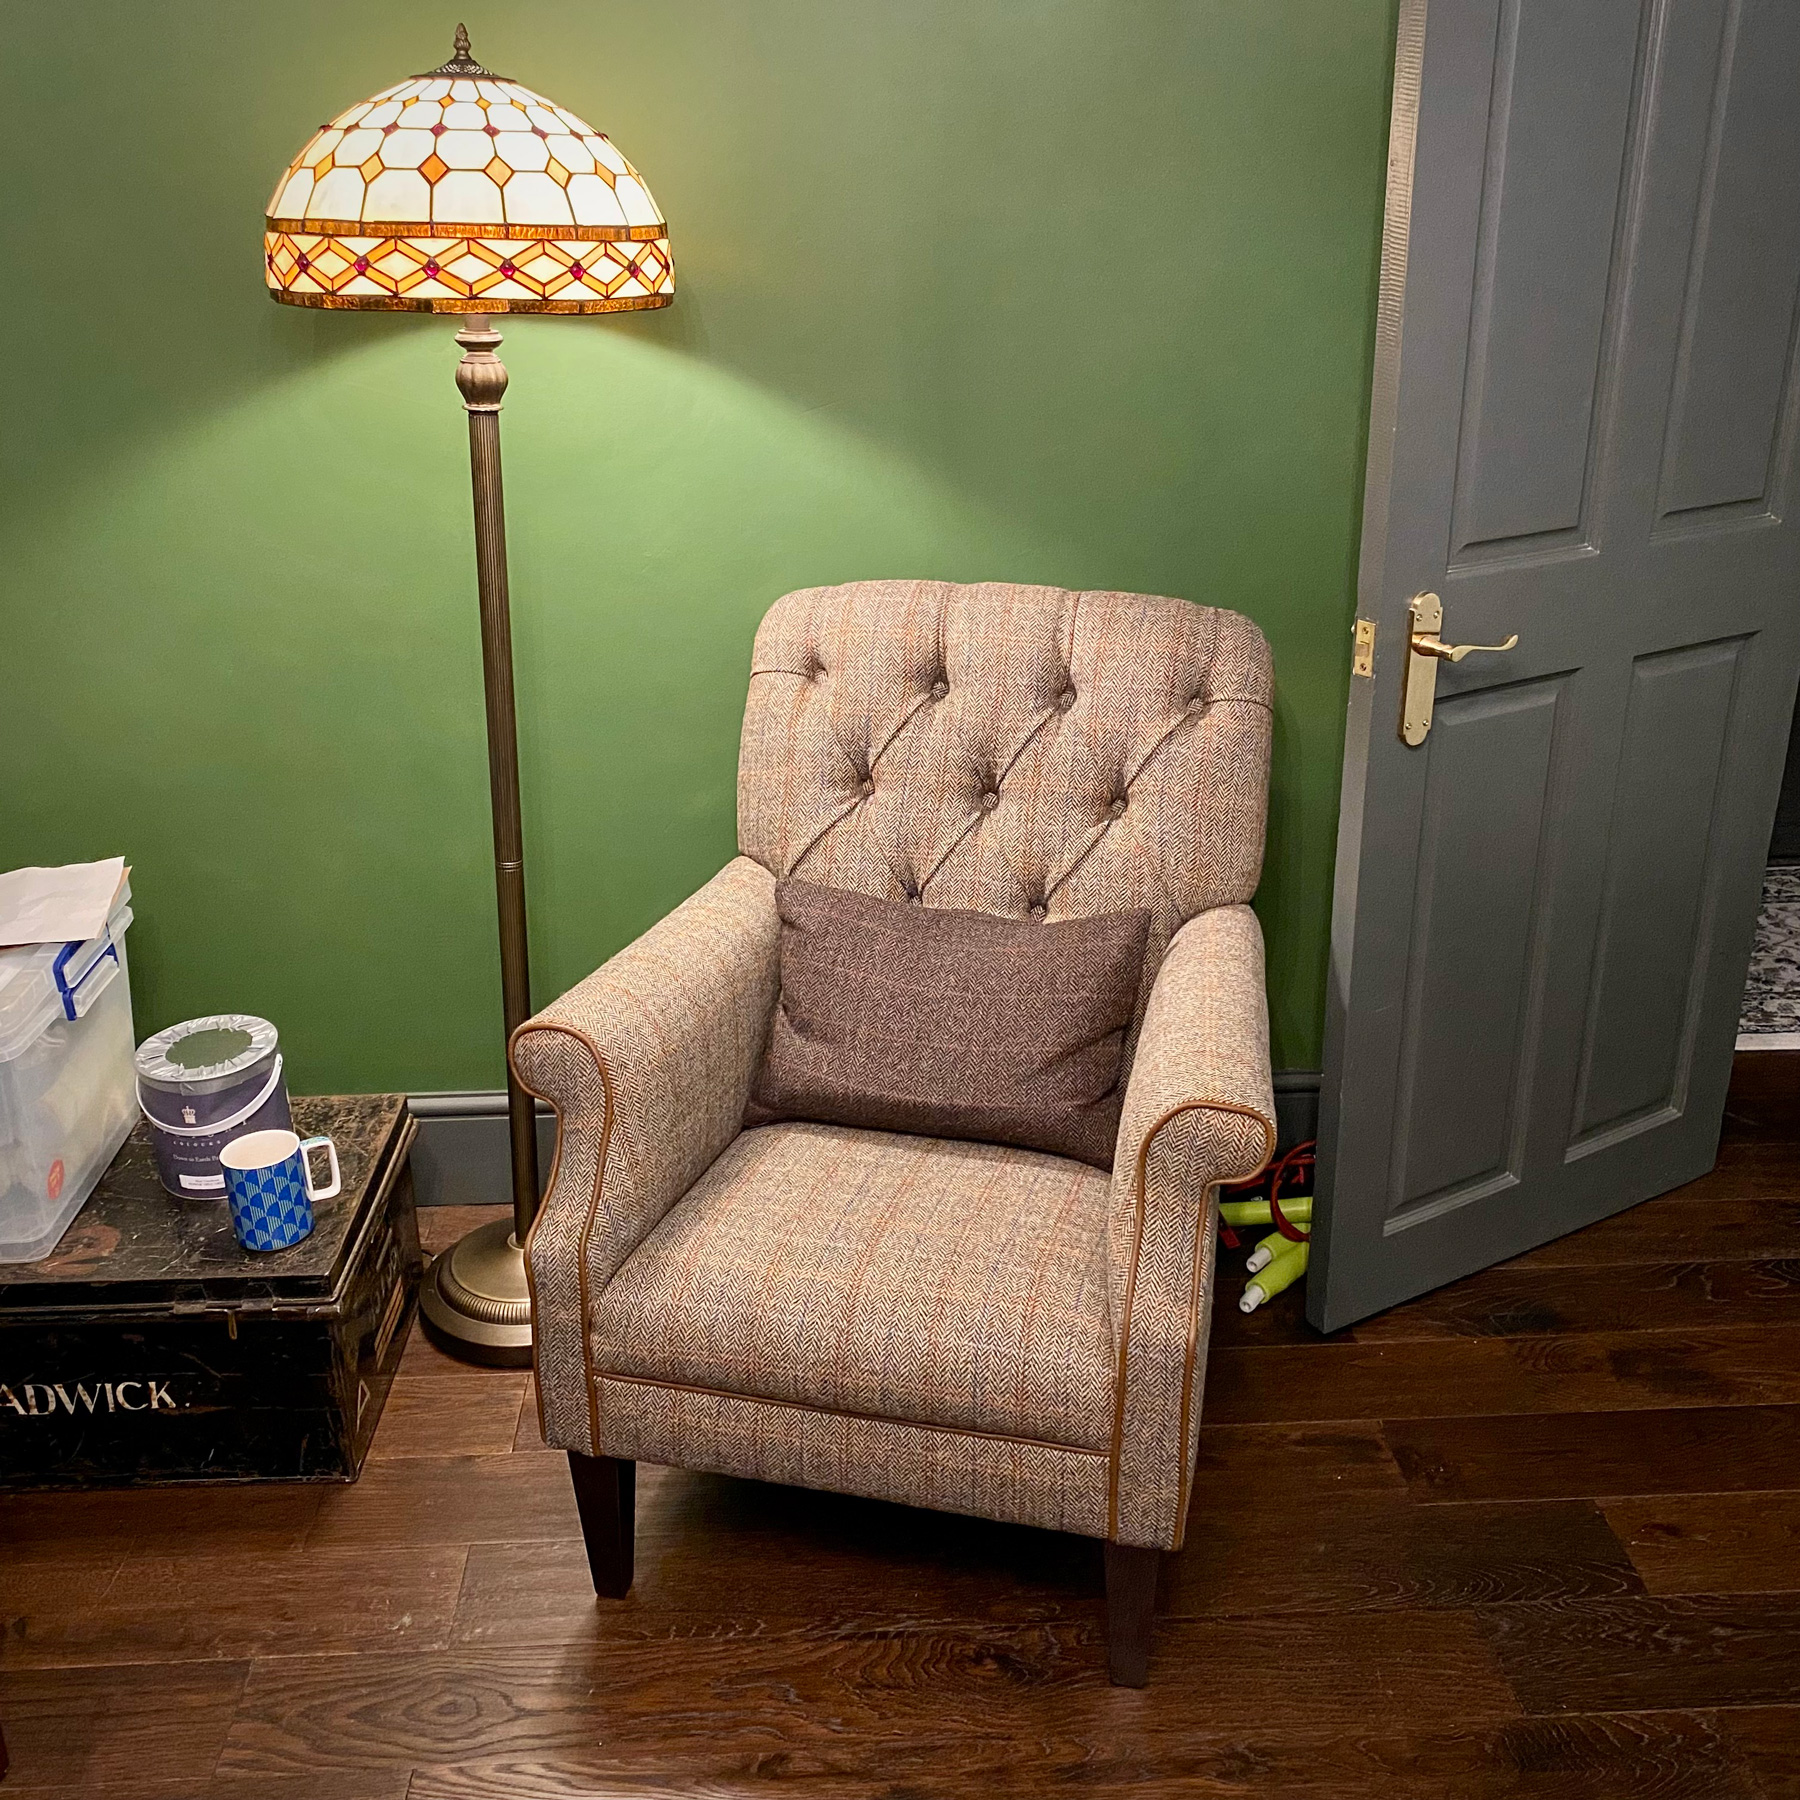 A cosy-looking tweed armchair lit by a tall lamp